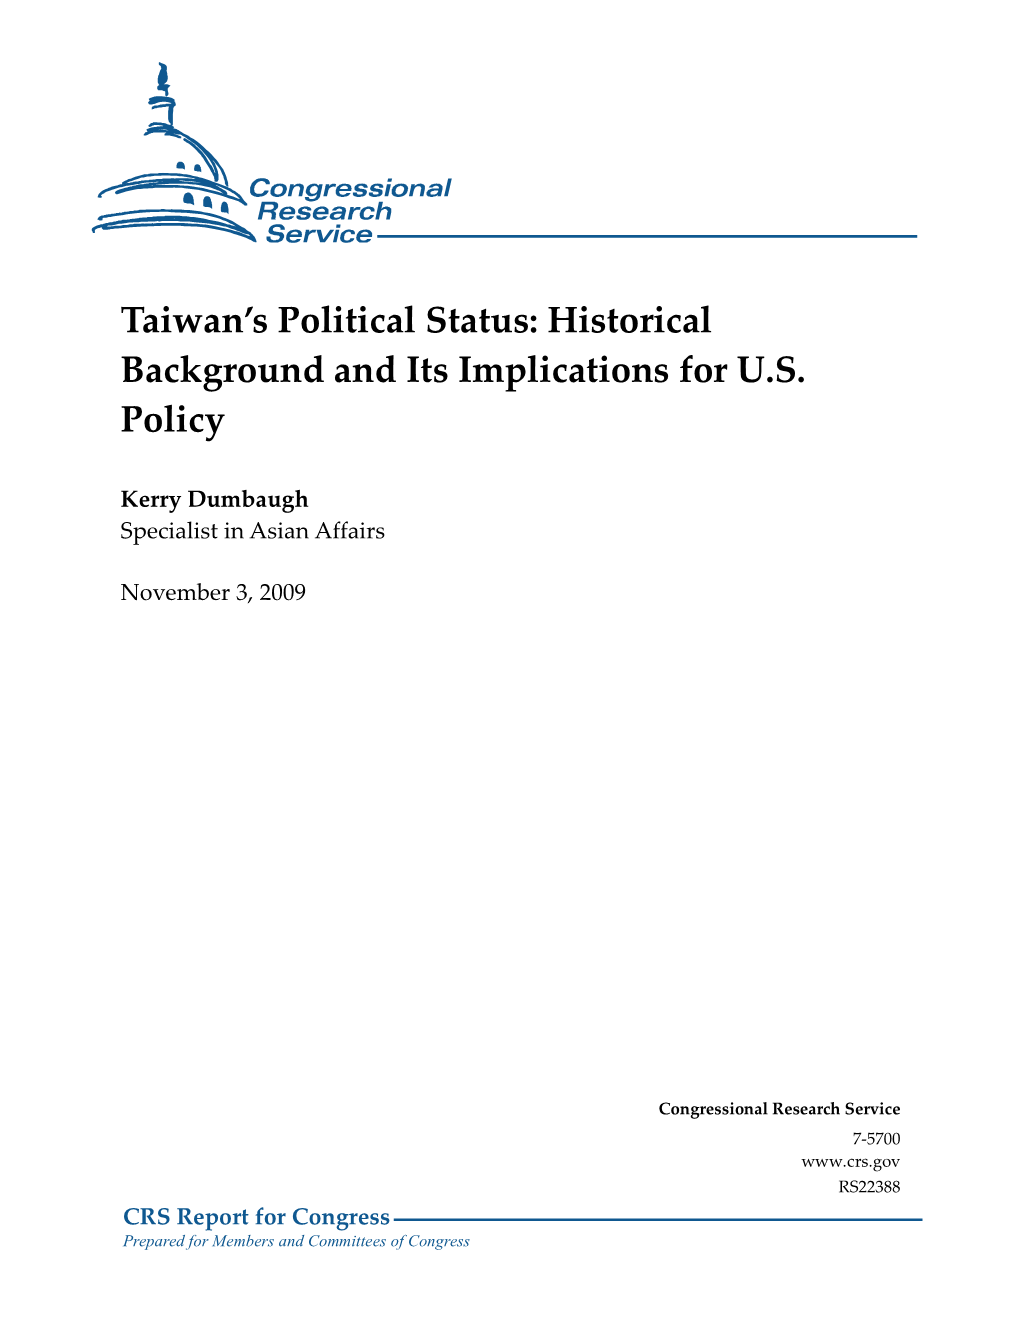 Taiwan's Political Status: Historical Background and Its Implications for U.S. Policy